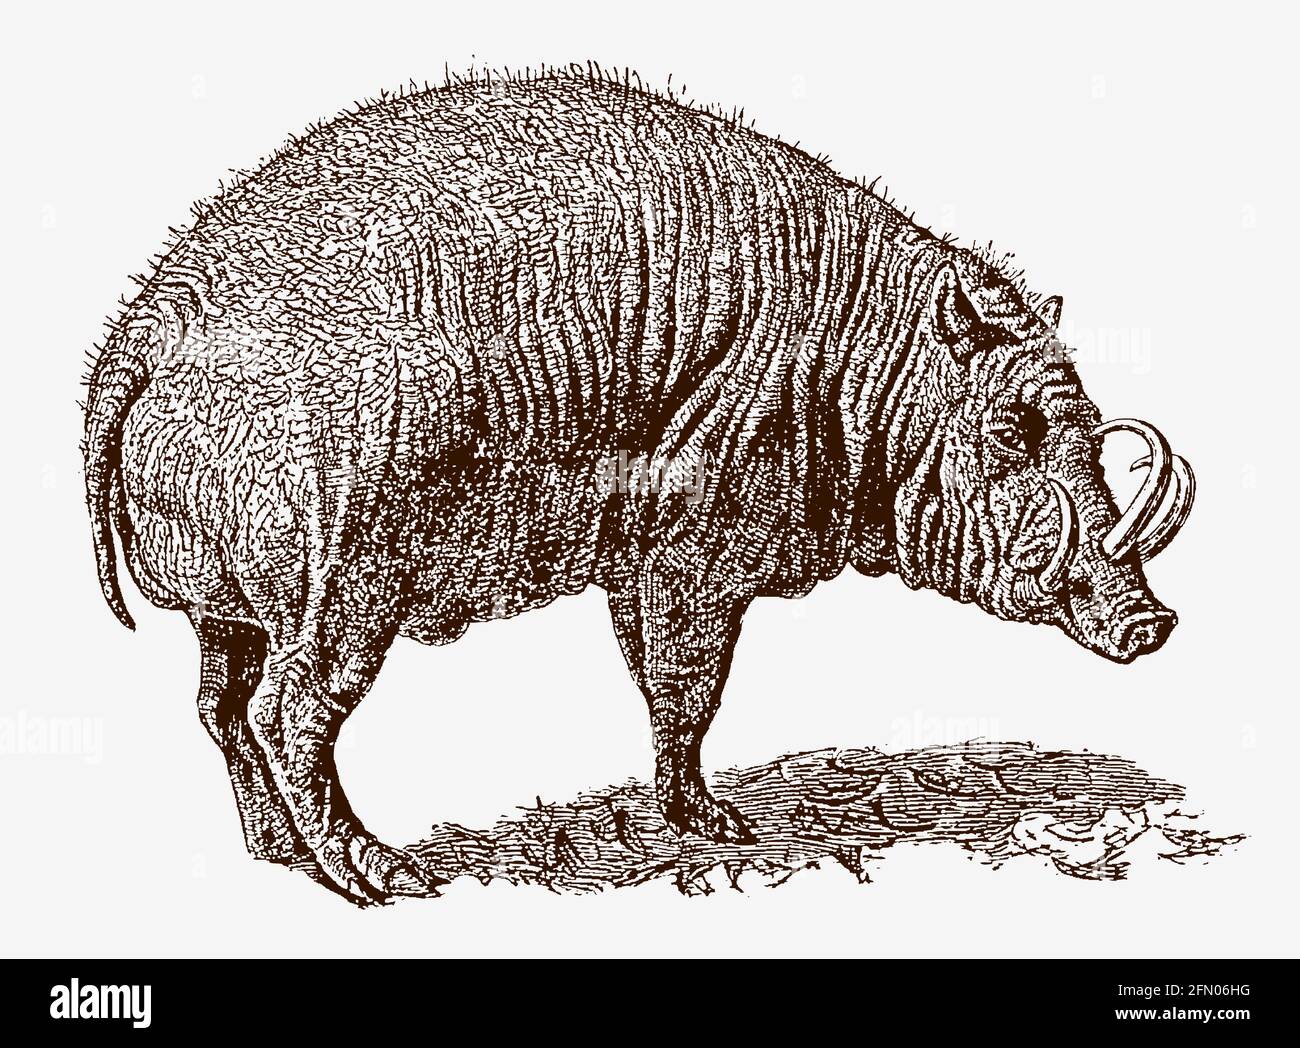 Threatened Buru babirusa, babyrousa babyrussa with distinctive tusks in profile view, after an antique engraving from the 19th century Stock Vector